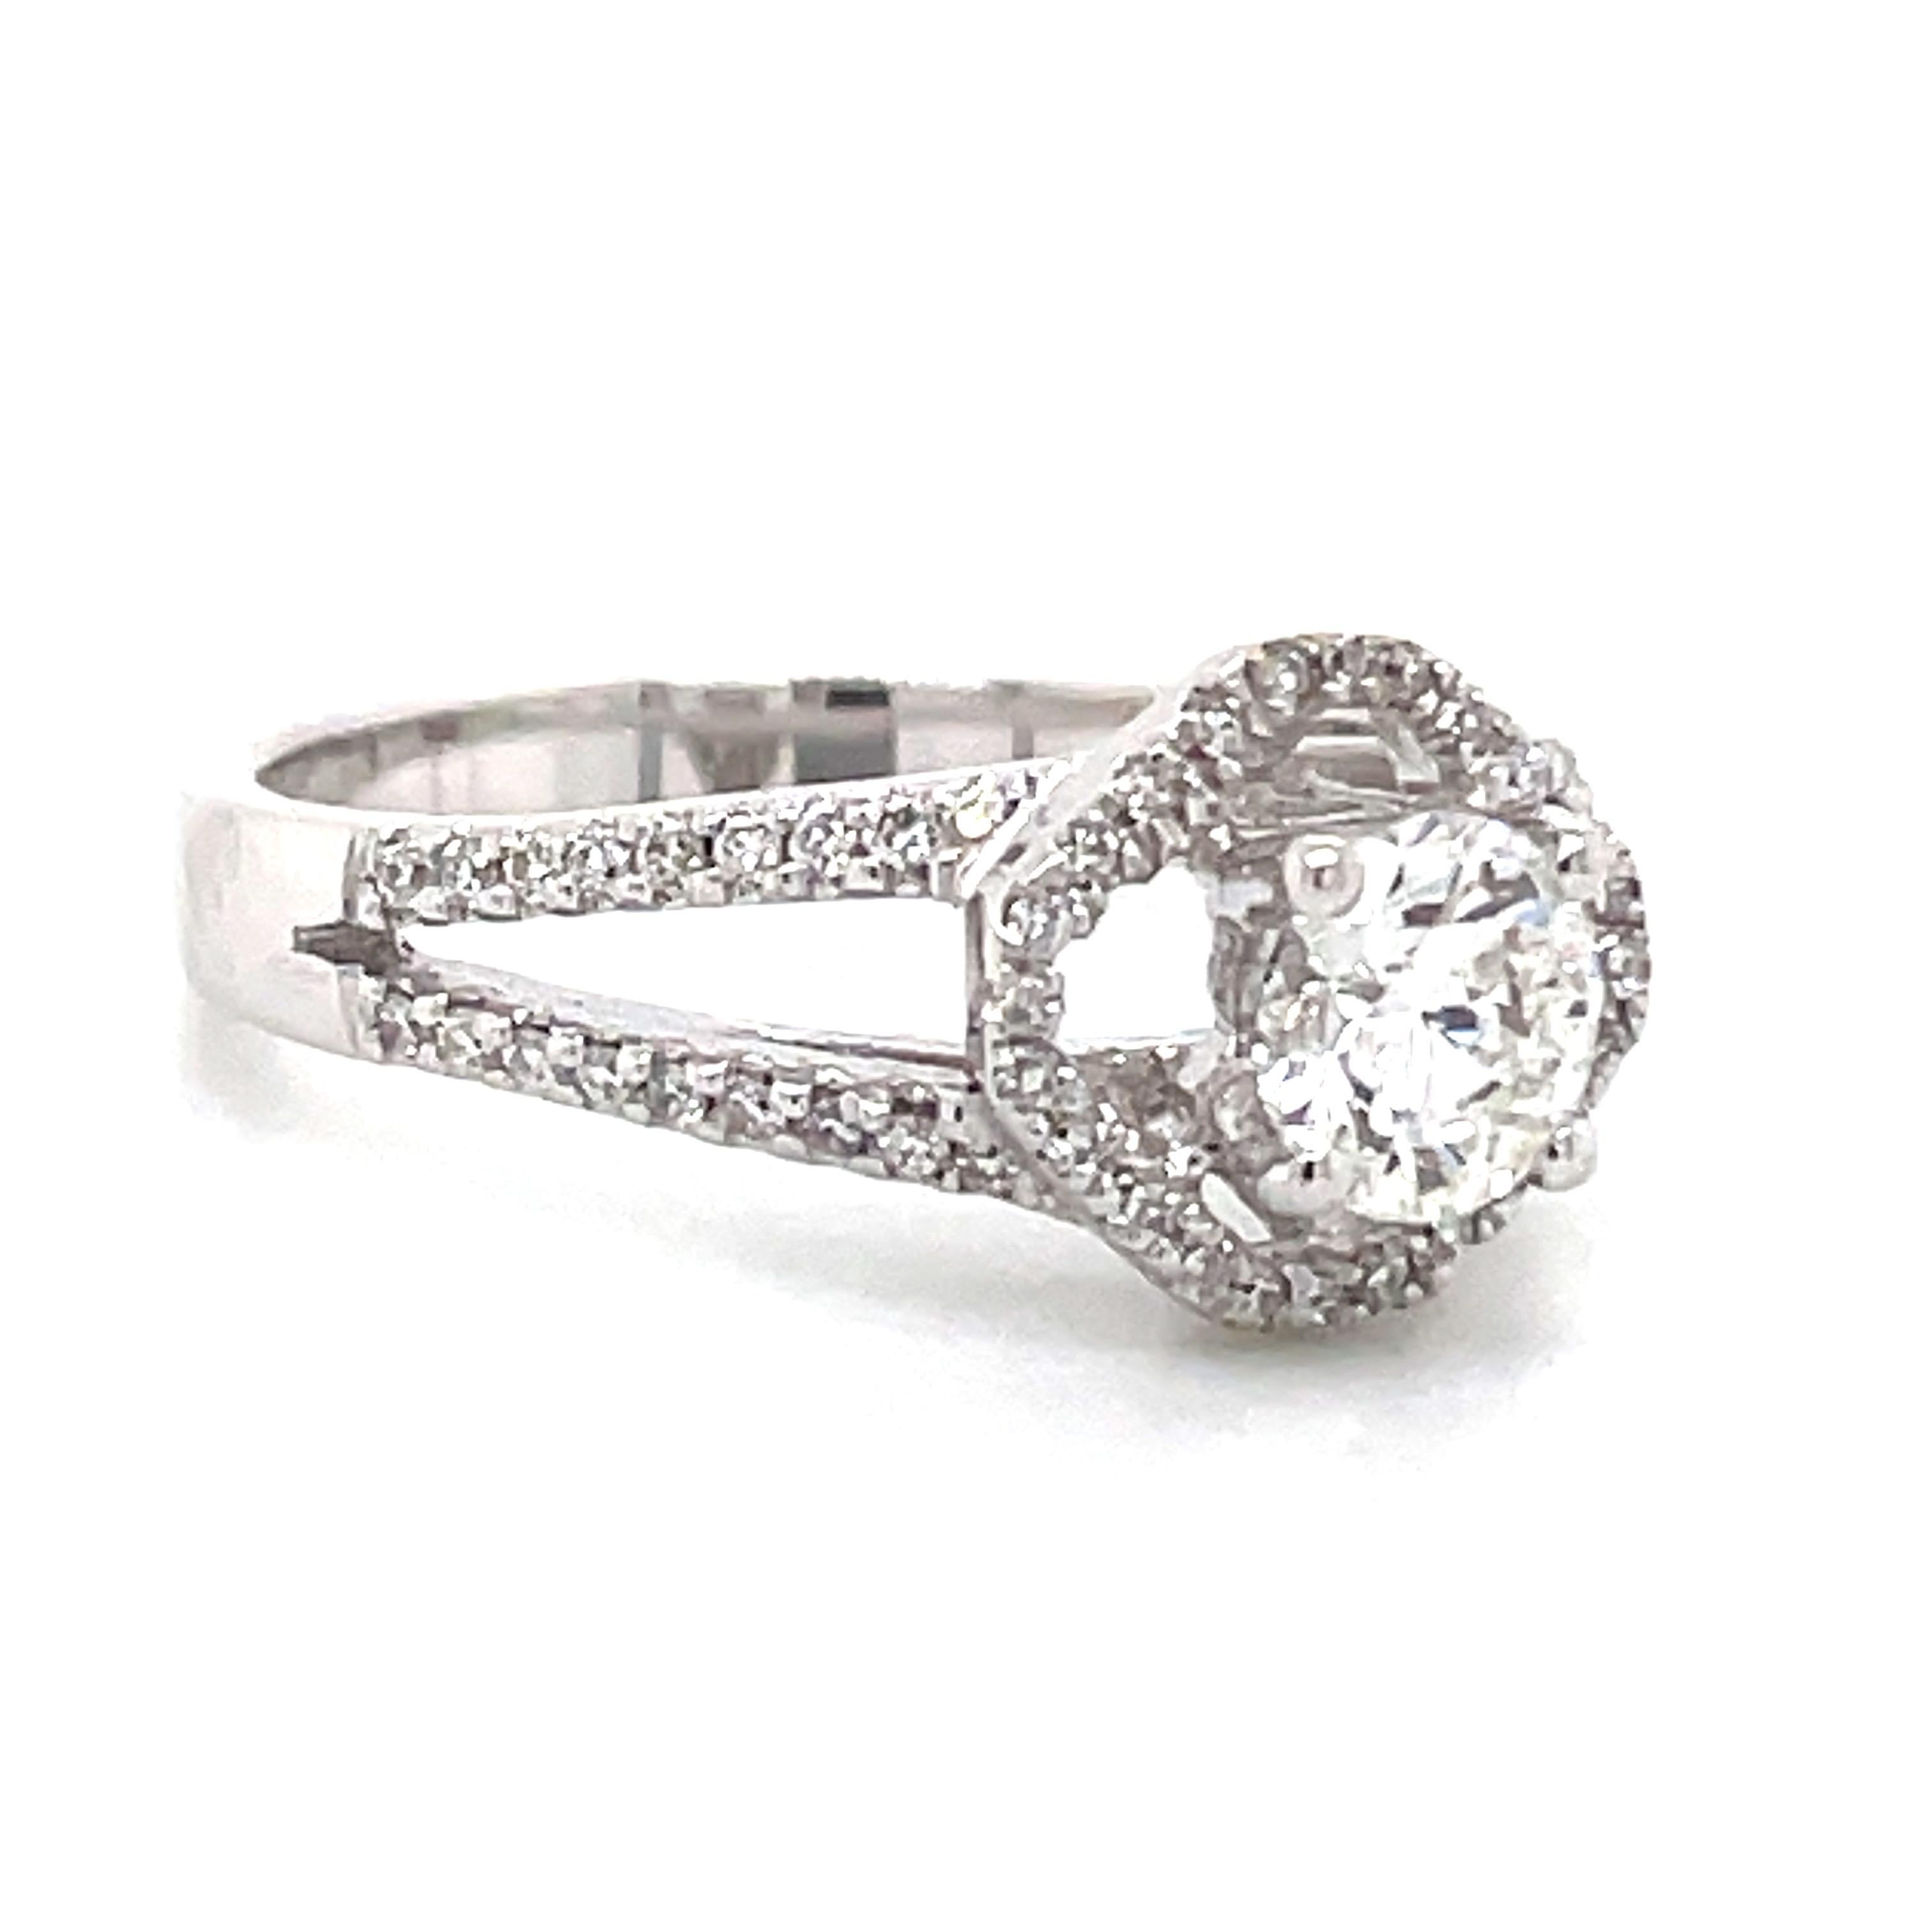 Elegance meets brilliance in this stunning 18k White Gold Round Brilliant Halo Diamond Engagement Ring. 

The centerpiece is a dazzling GIA-certified diamond round at 0.54 cts that is held securely in a four-prong setting, showcasing exquisite